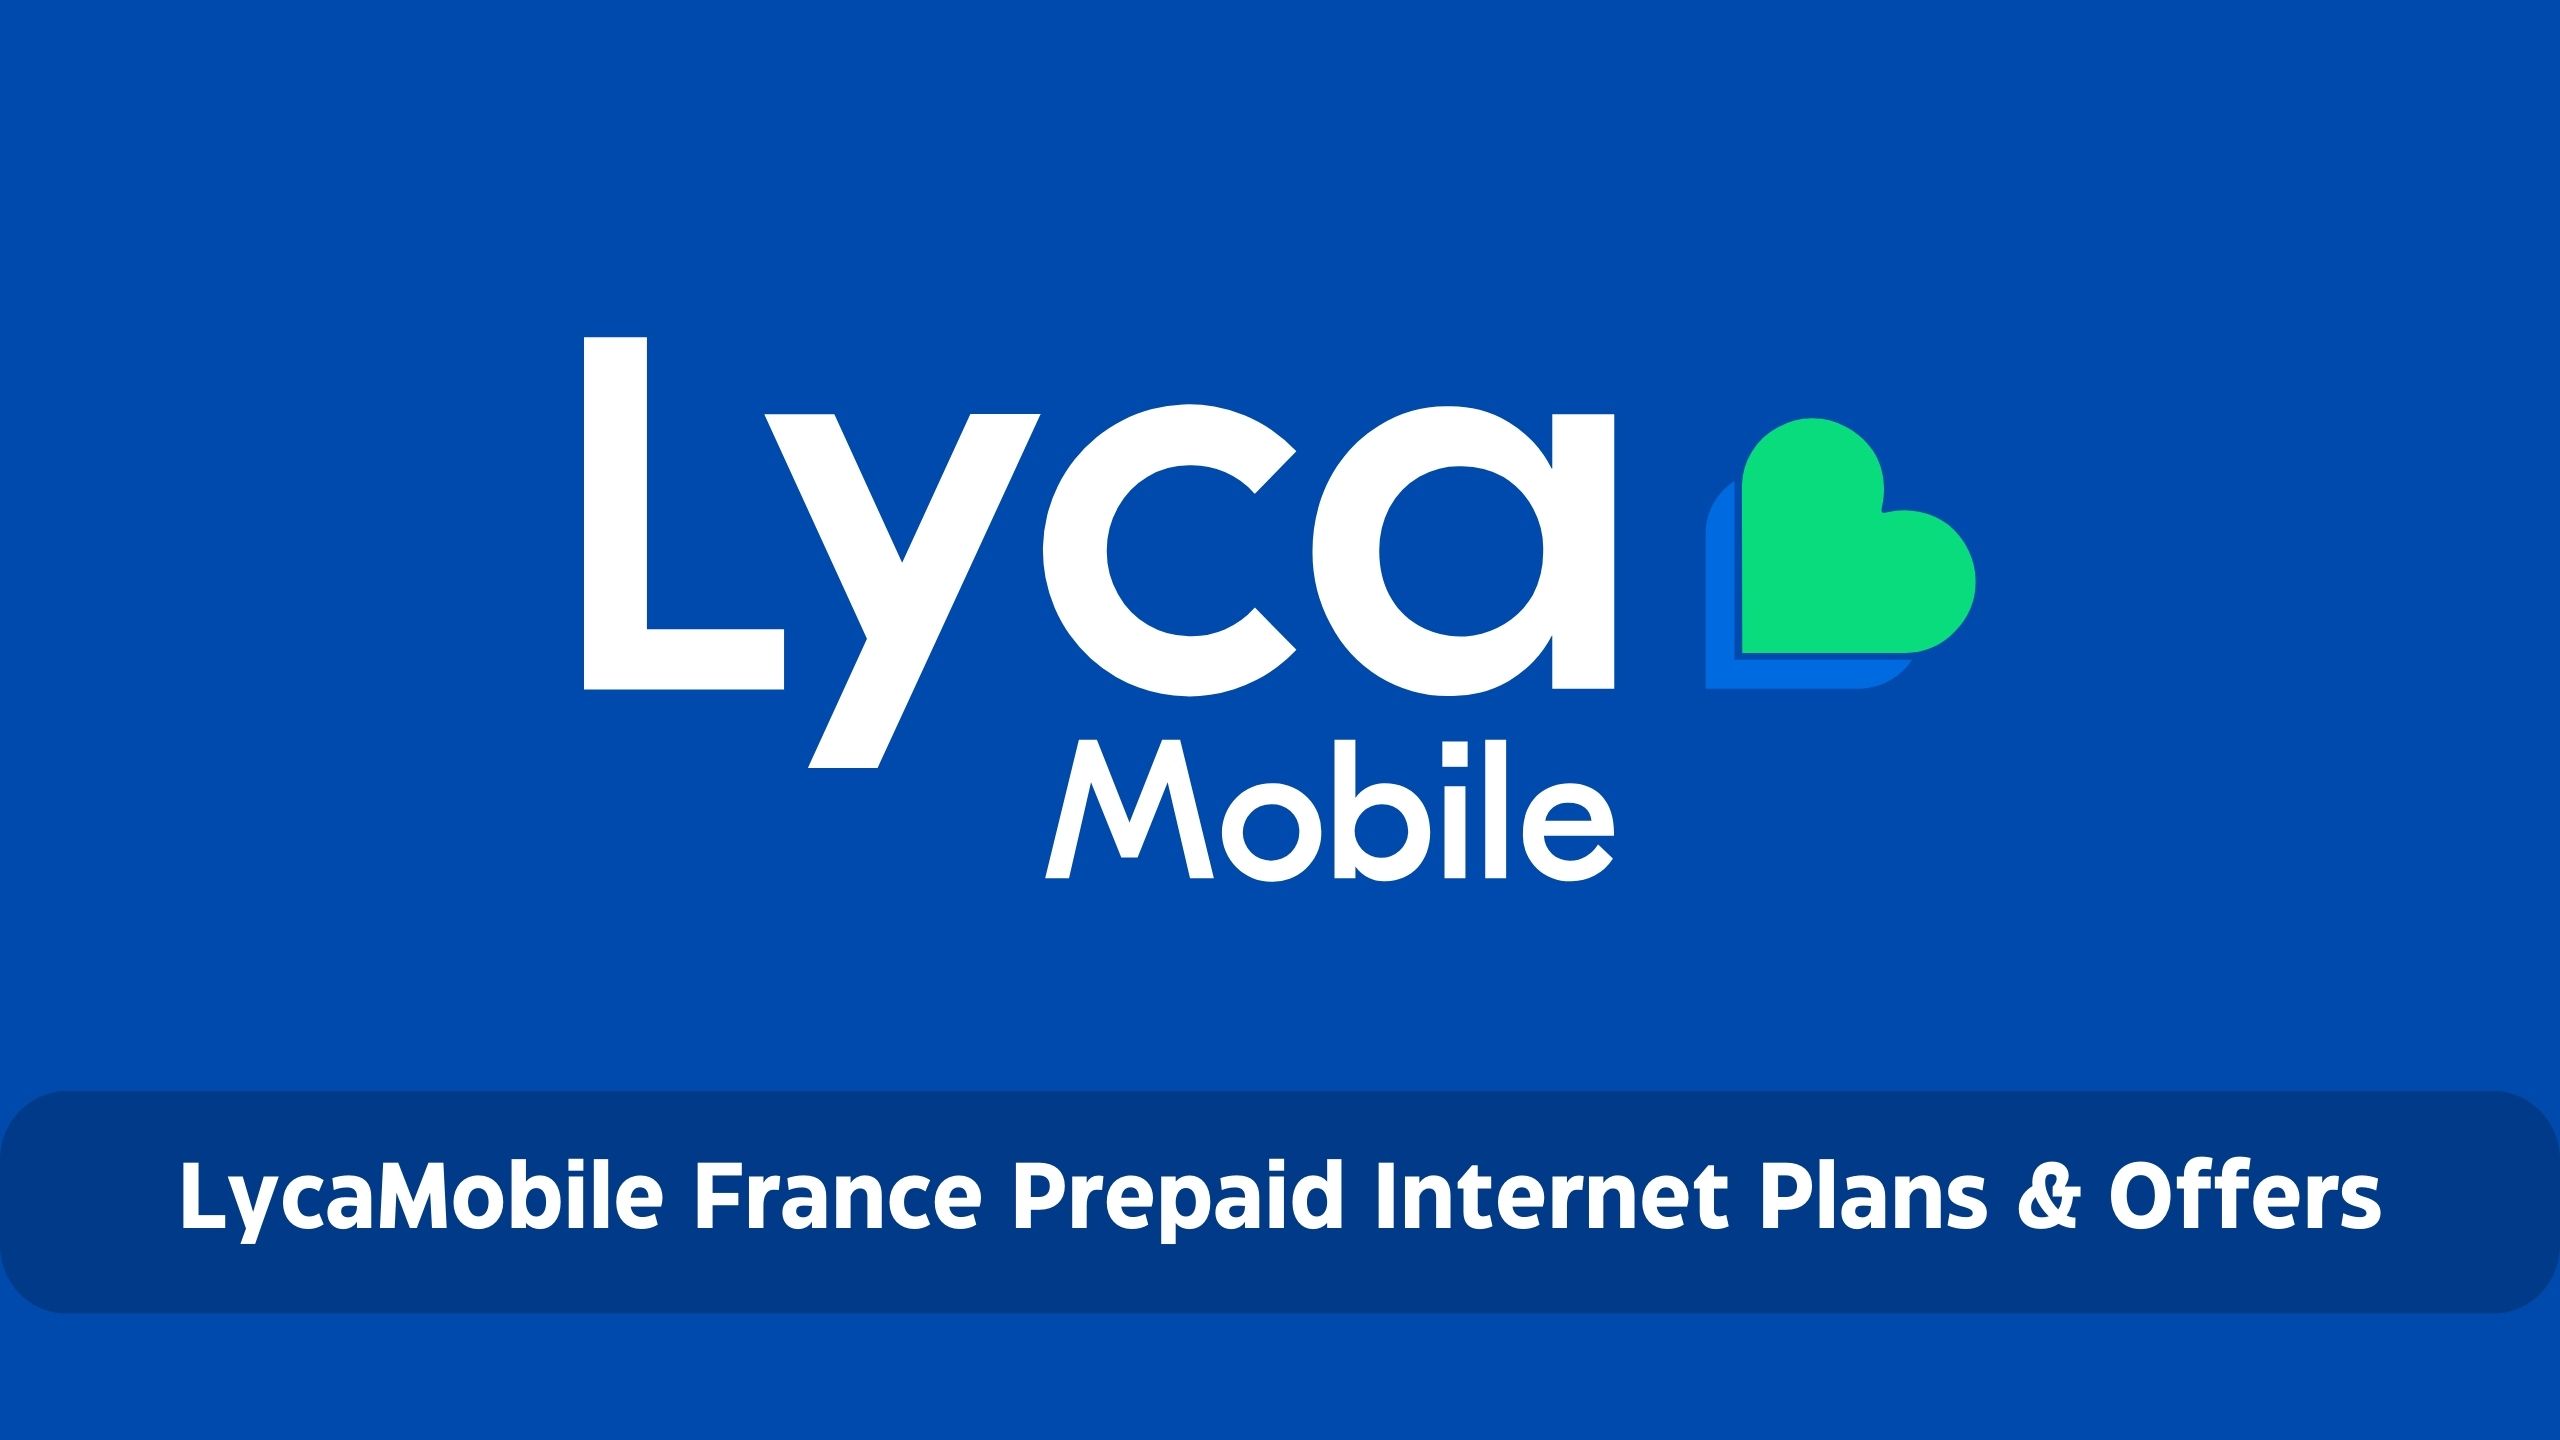 LycaMobile France Prepaid Internet Plans & Offers : Data, Call, Text Promo & Roaming